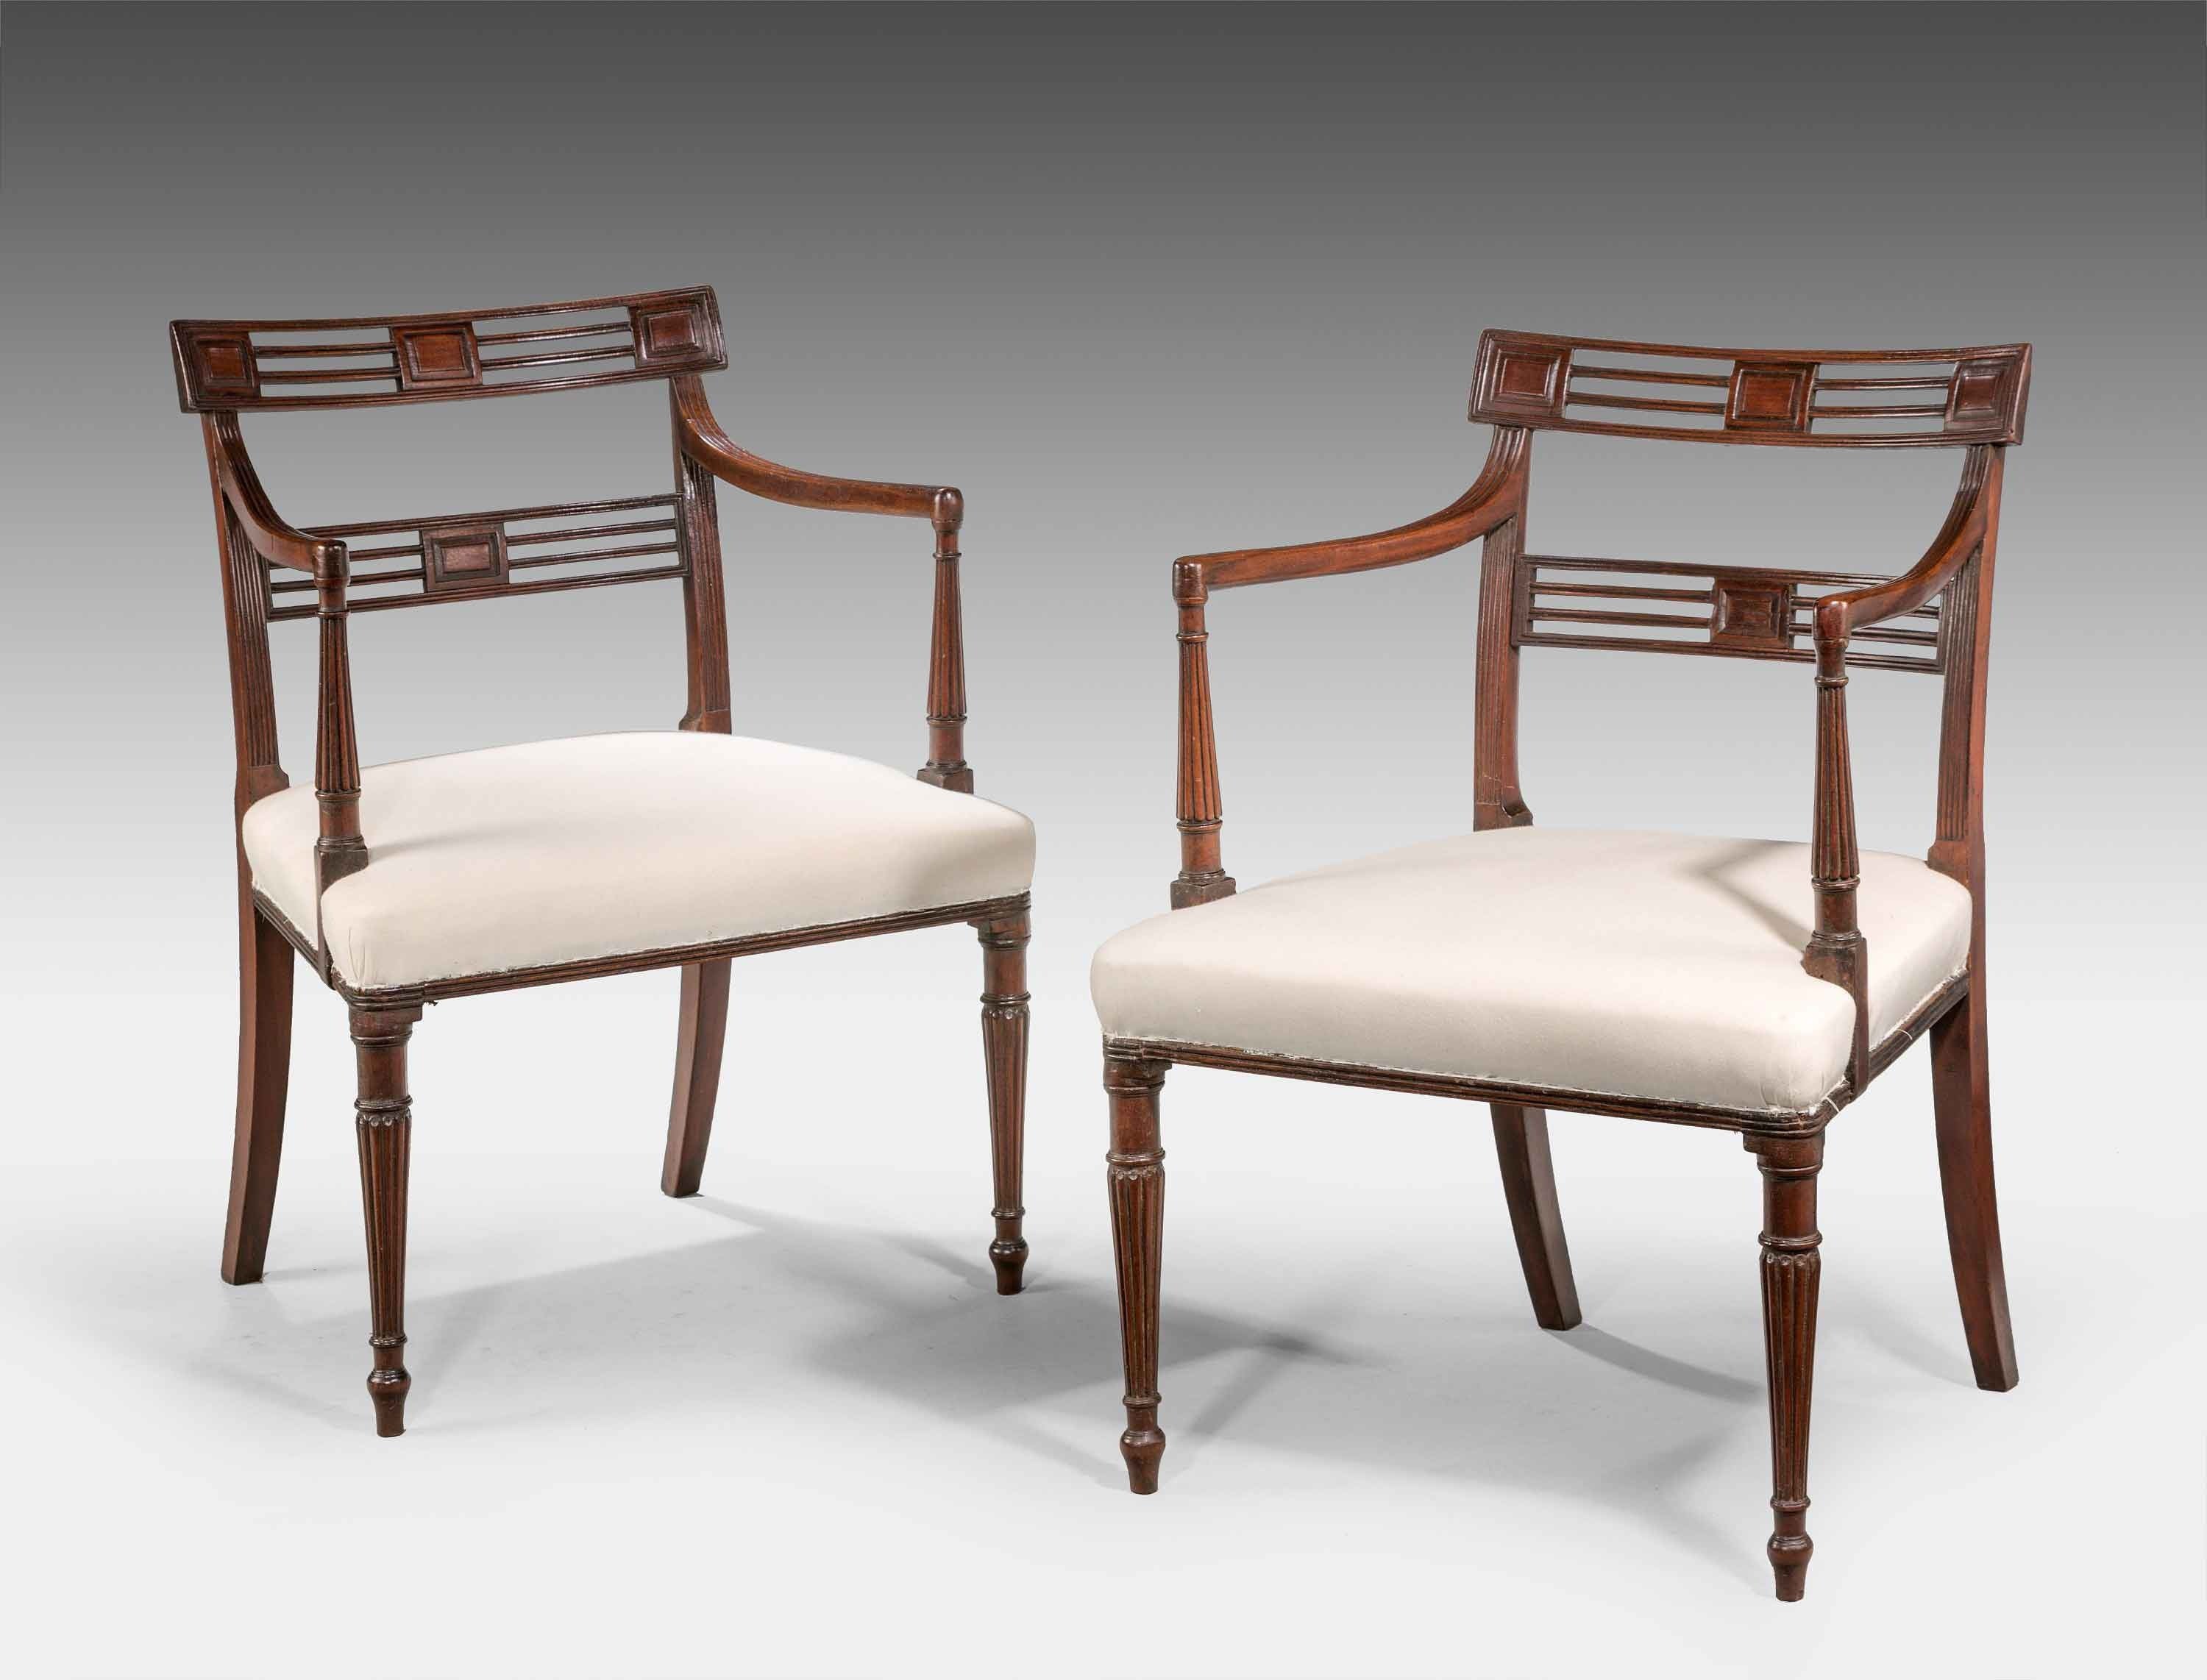 Pair of George III Period Mahogany Elbow Chairs